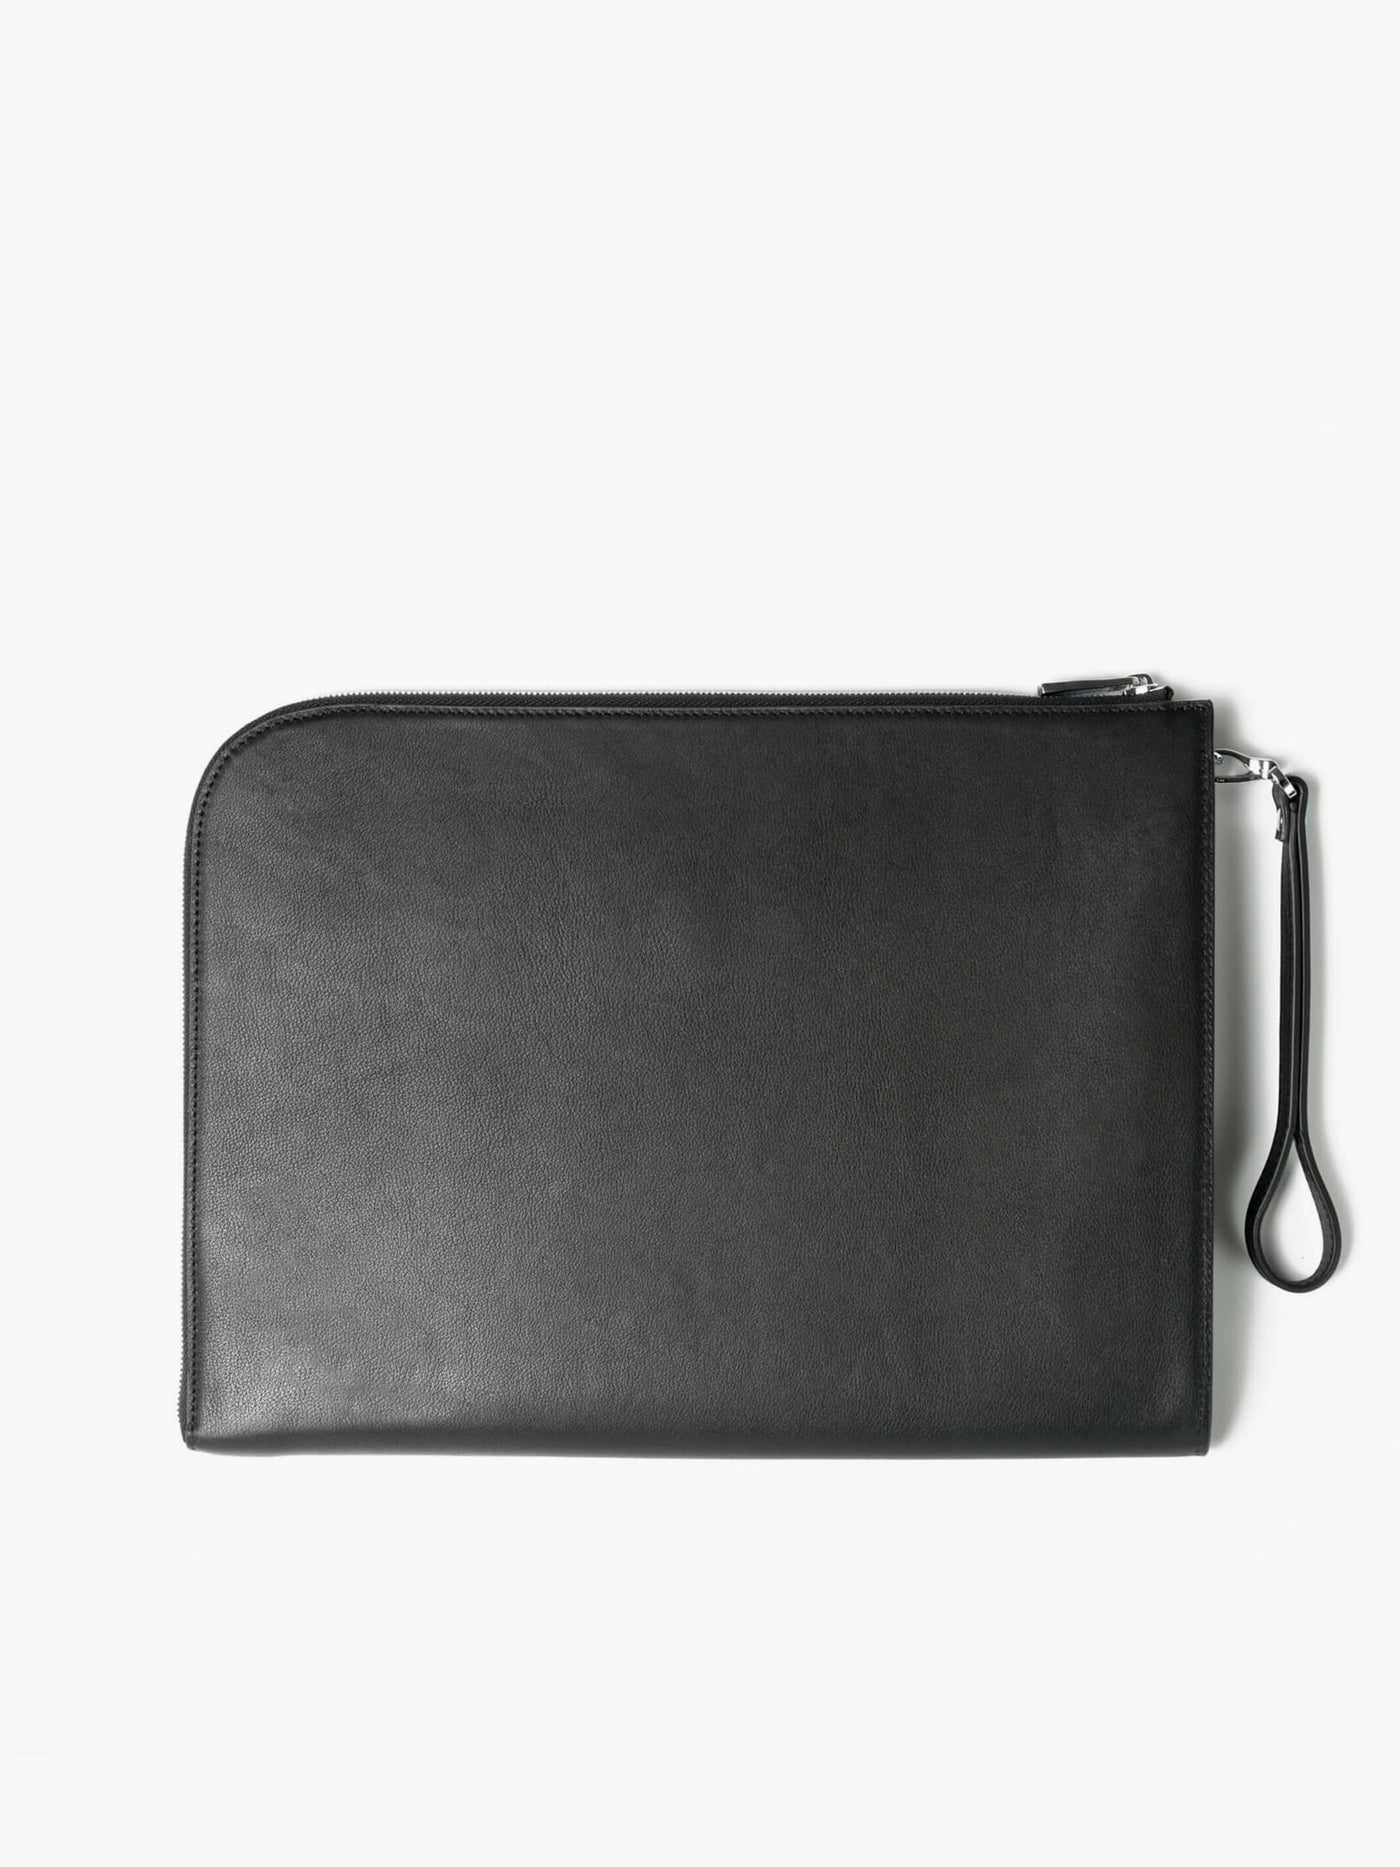 patent leather clutch